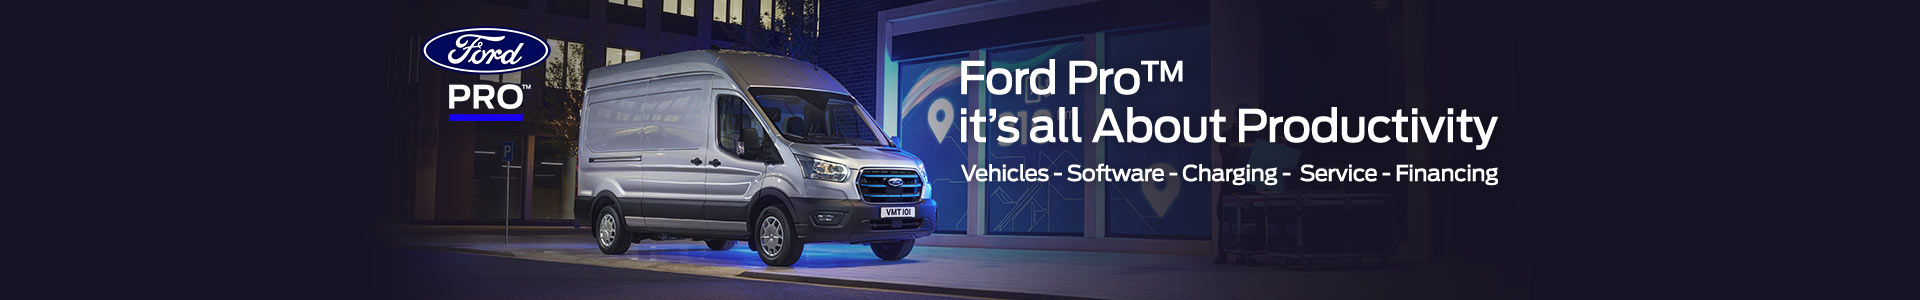 Ford Pro - It's all about productivity.